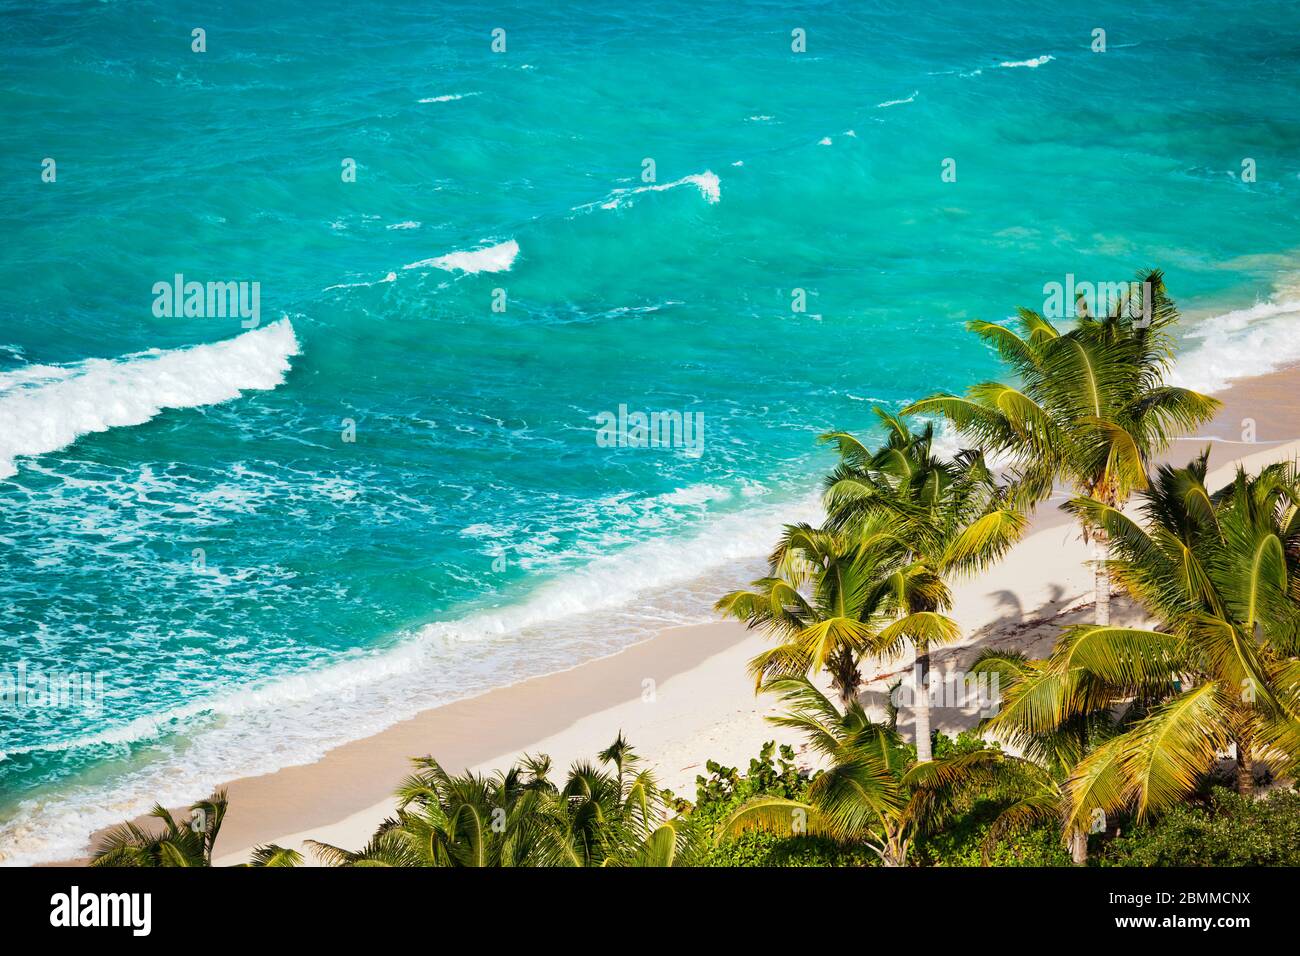 A beautiful caribbean beach with lots of palm trees and tall waves seen from a high observation point. Galley Bay, Antigua. Stock Photo